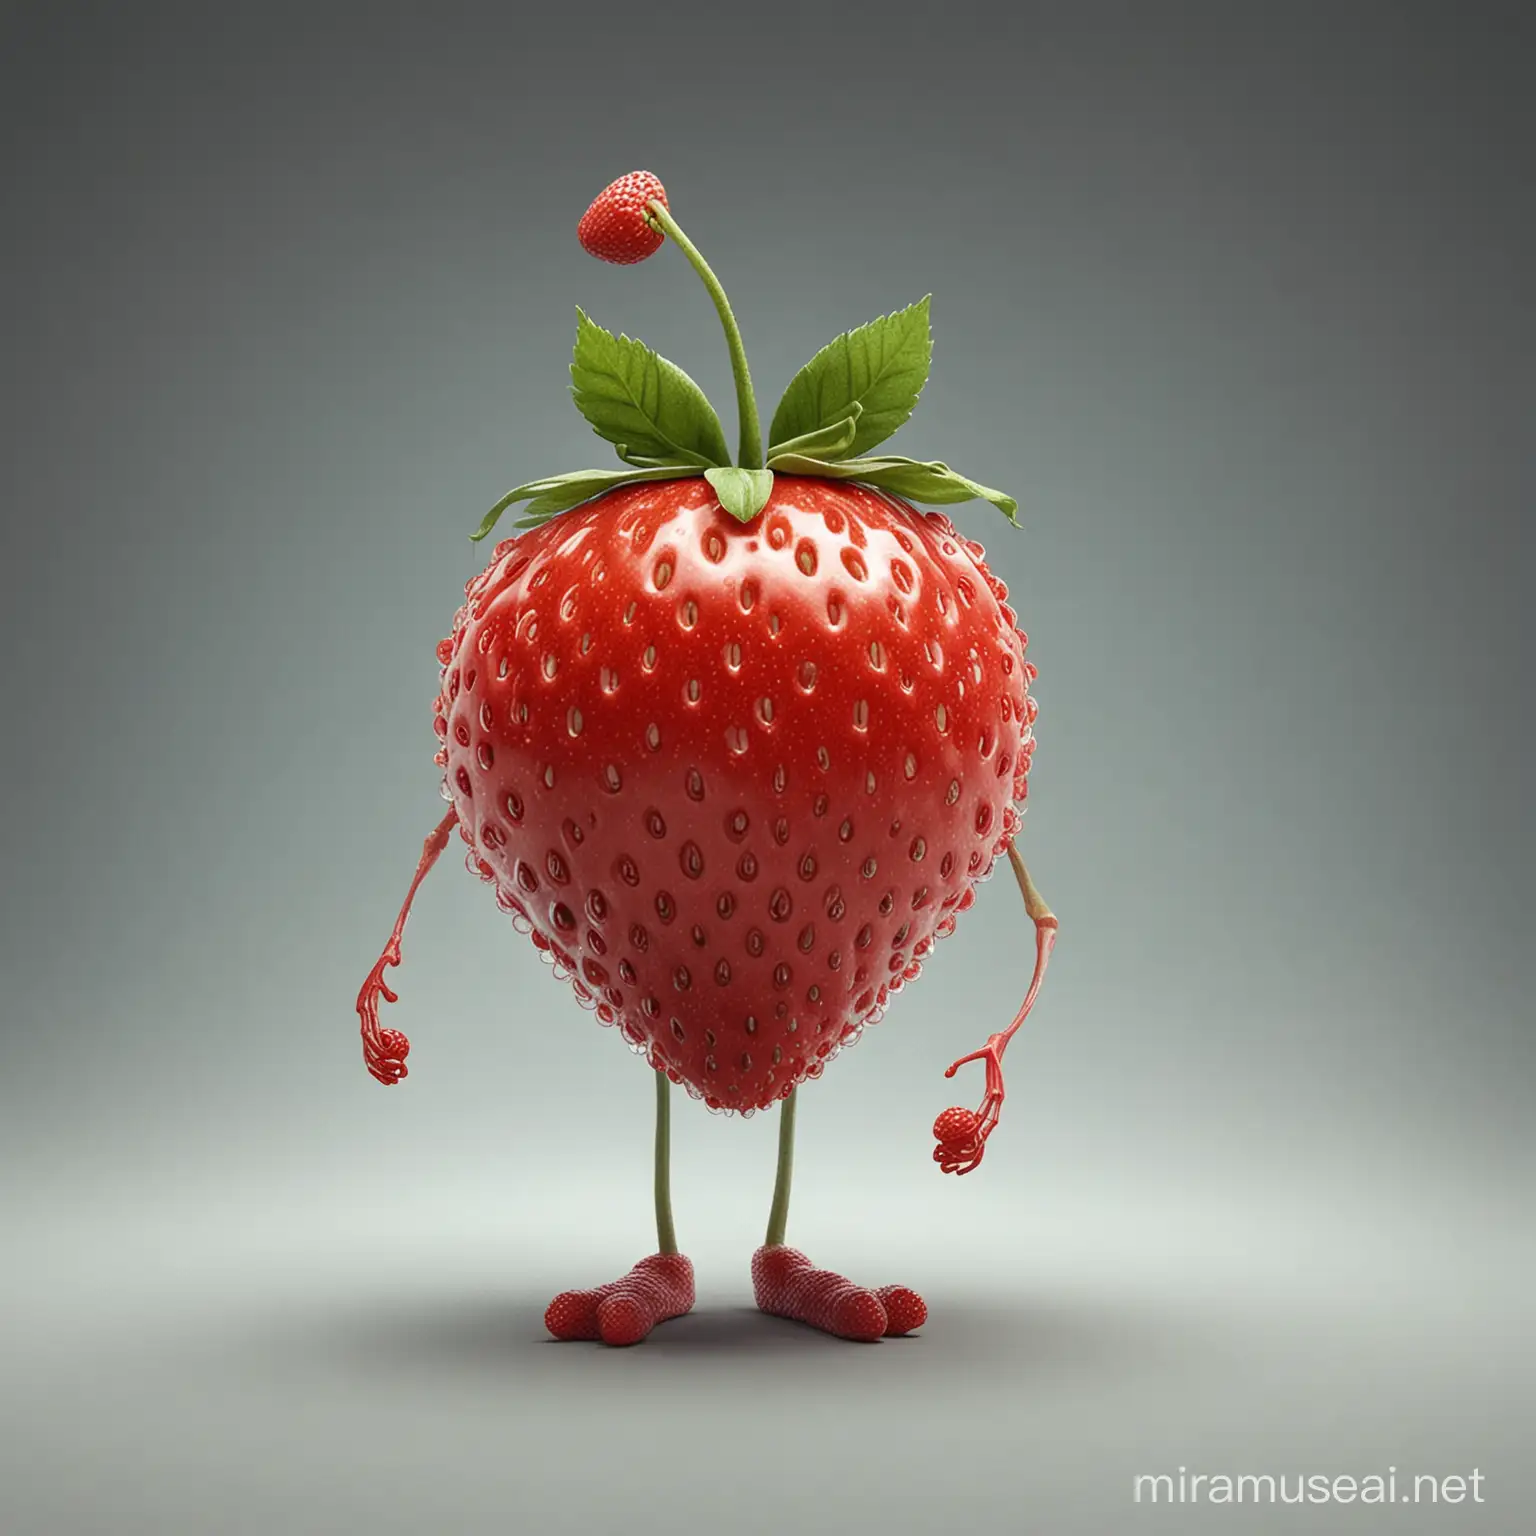 An imaginary strawberry that is like a human and has feet and hands.